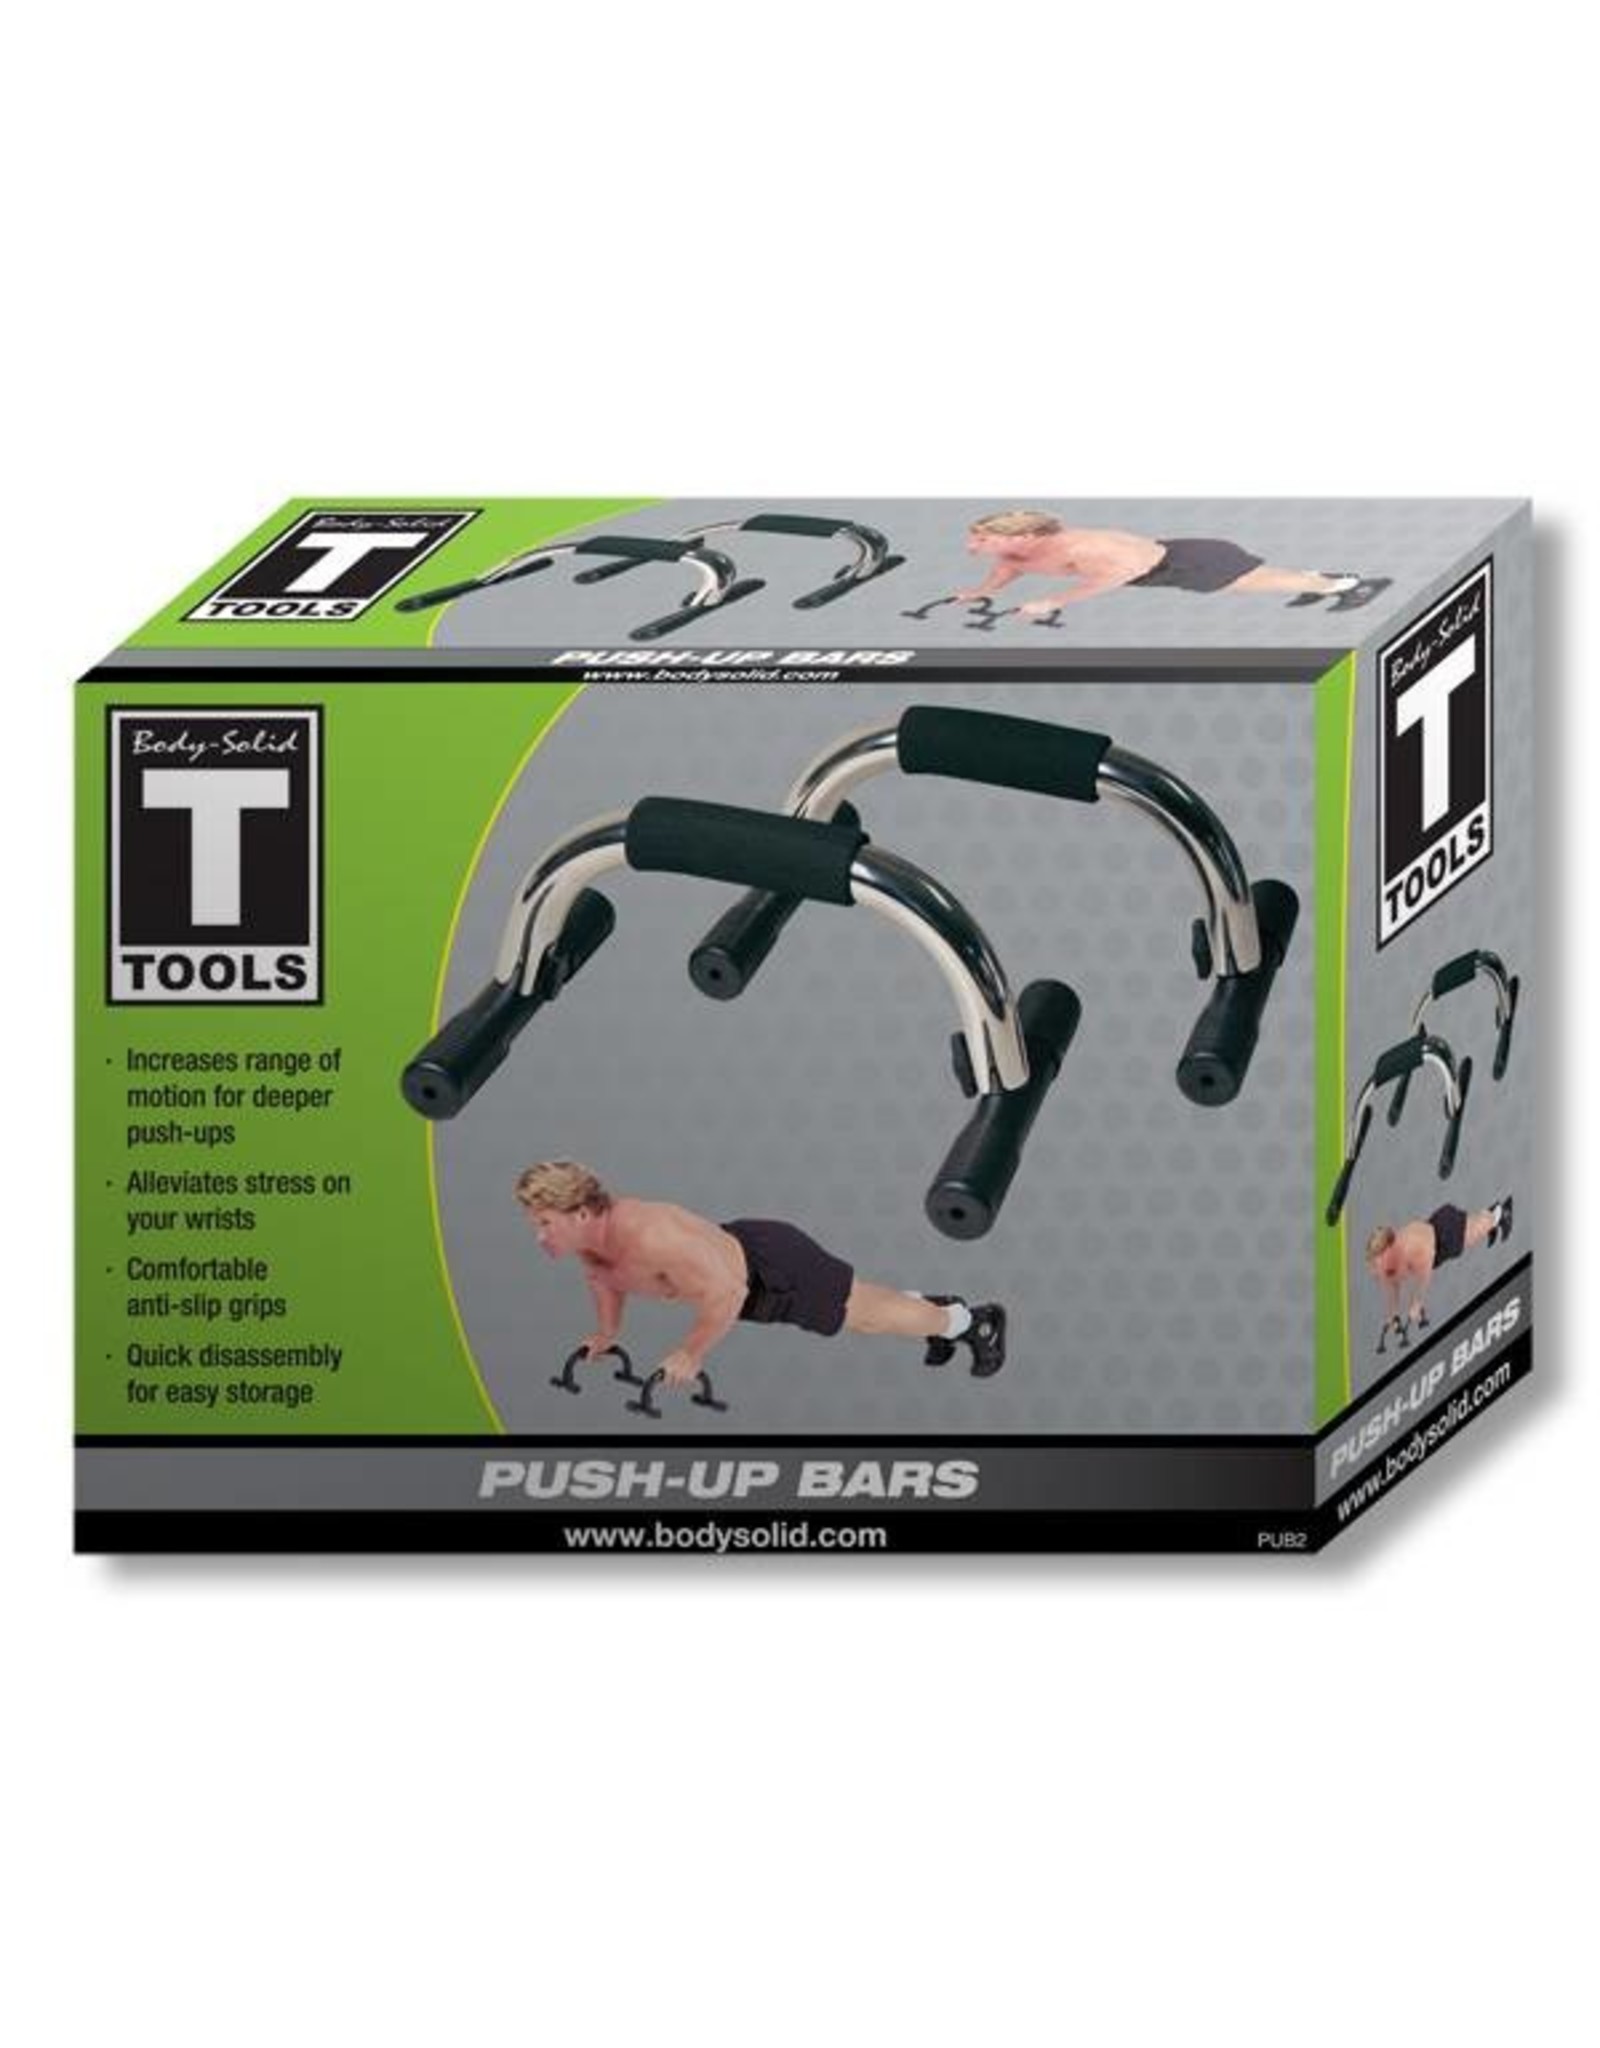 Body-Solid Body-Solid Push Up Bars